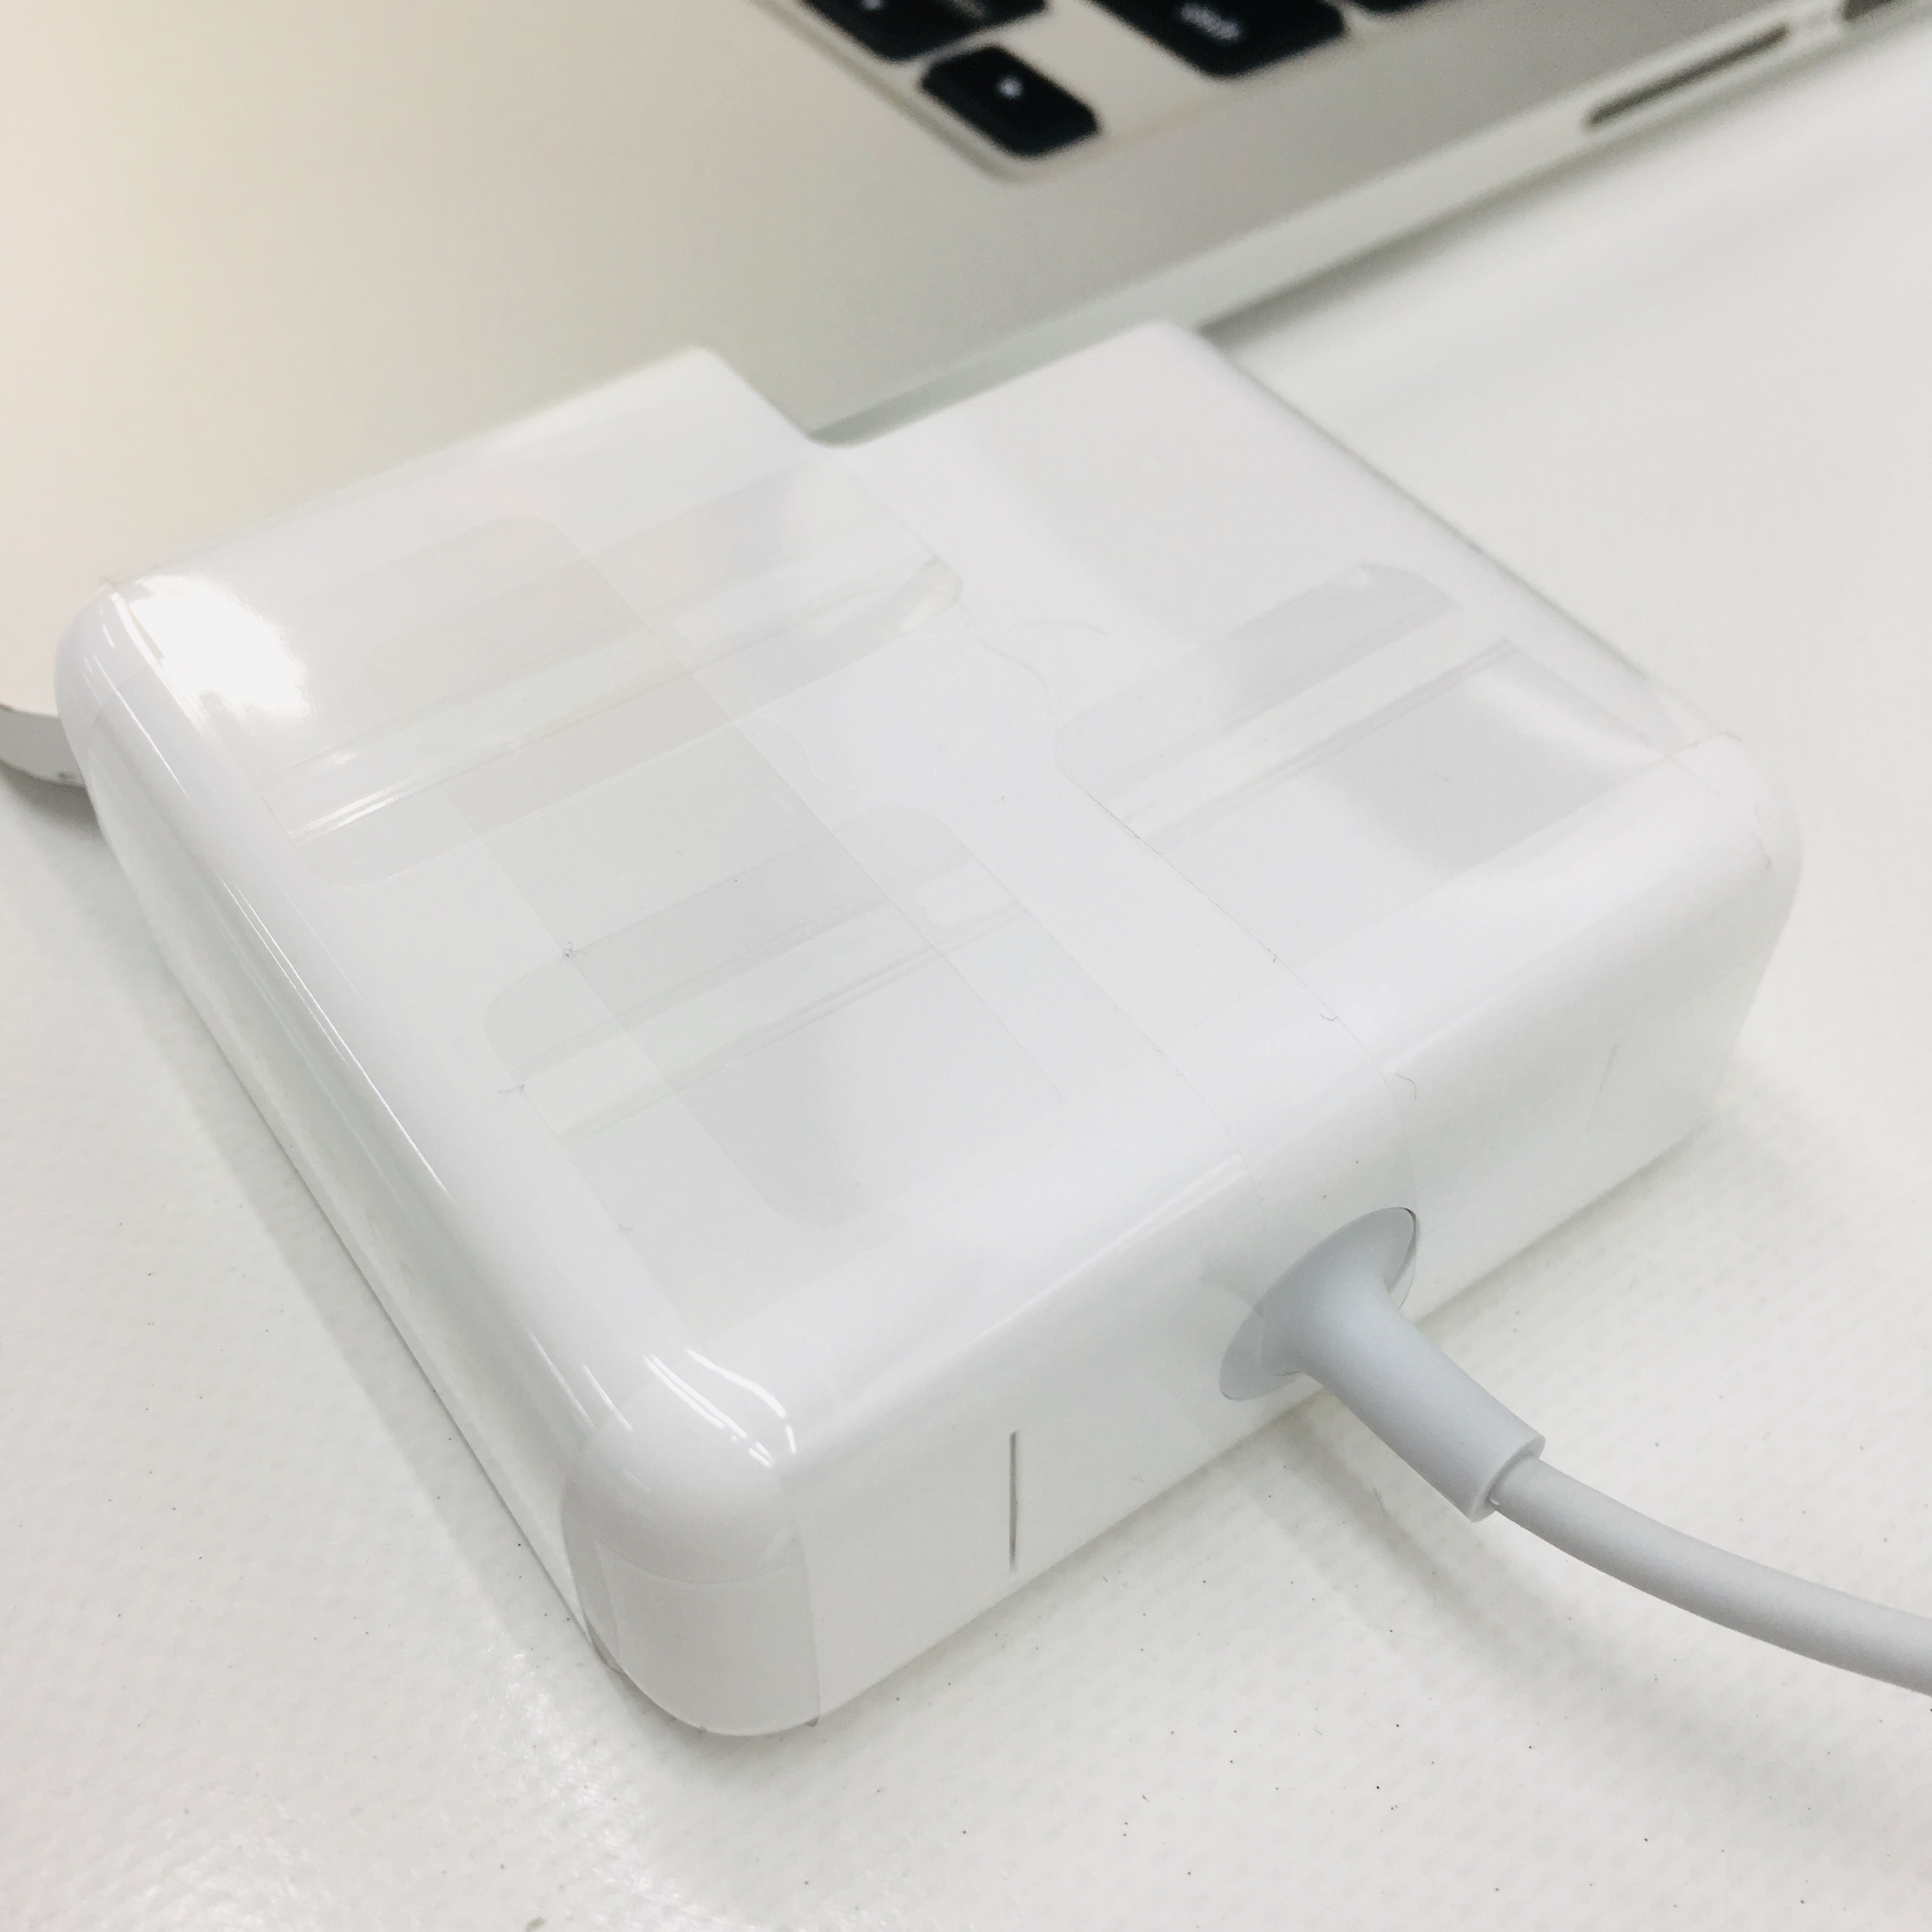 macbook pro early 2015 charger